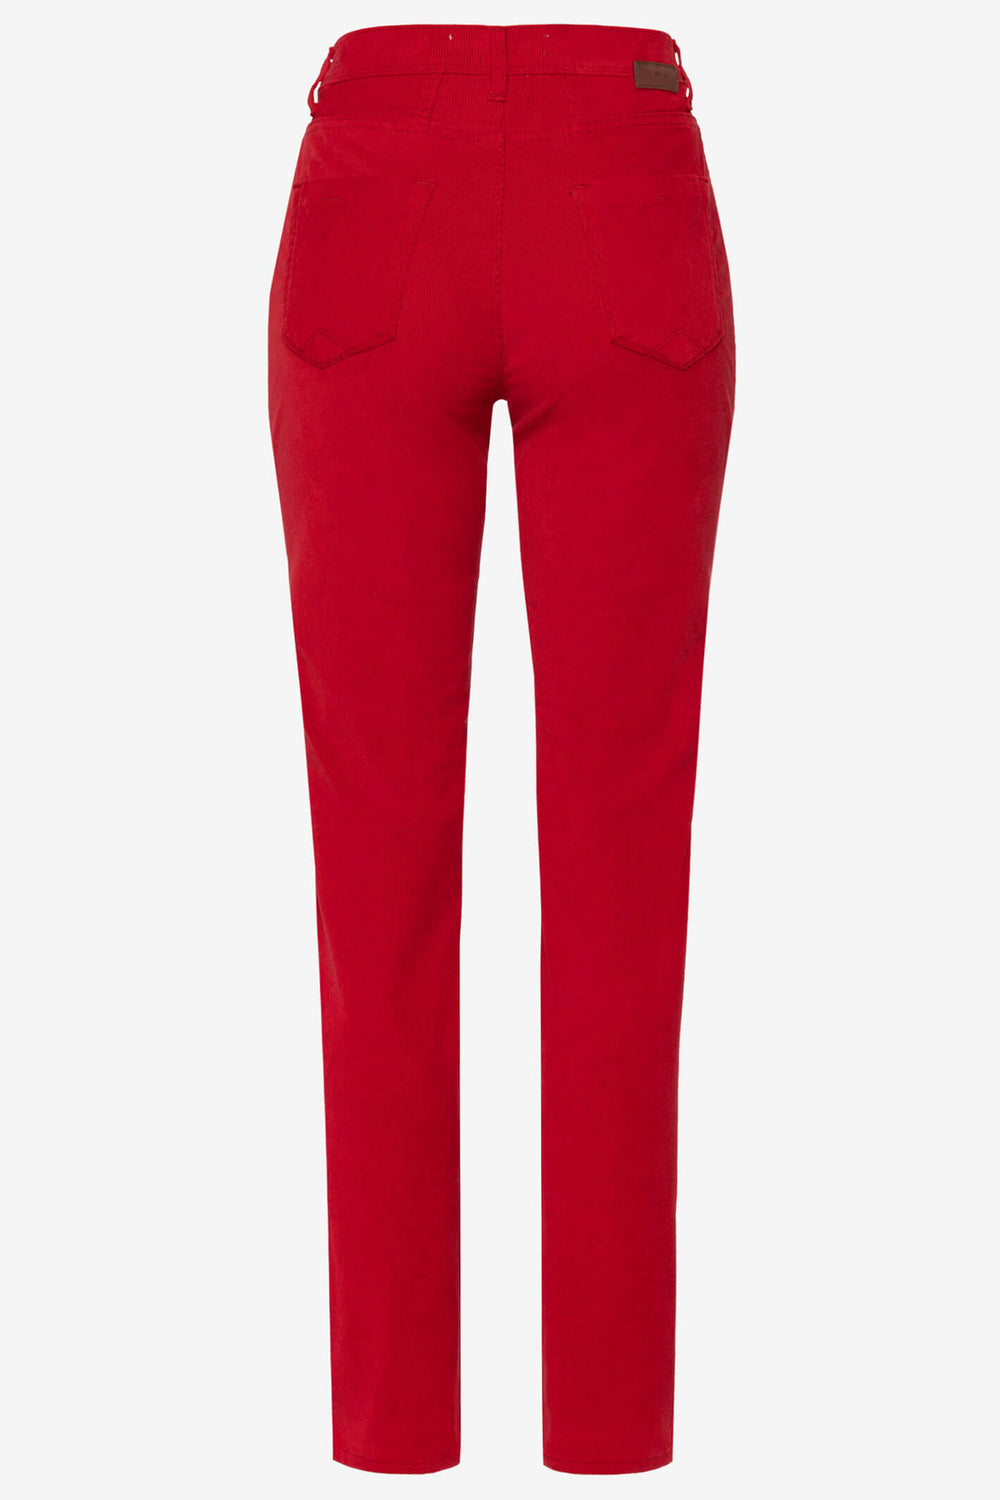 Brax Mary 73-1838 09115720 43 Cherry Red Five Pocket Cord Jeans - Shirley Allum Boutique